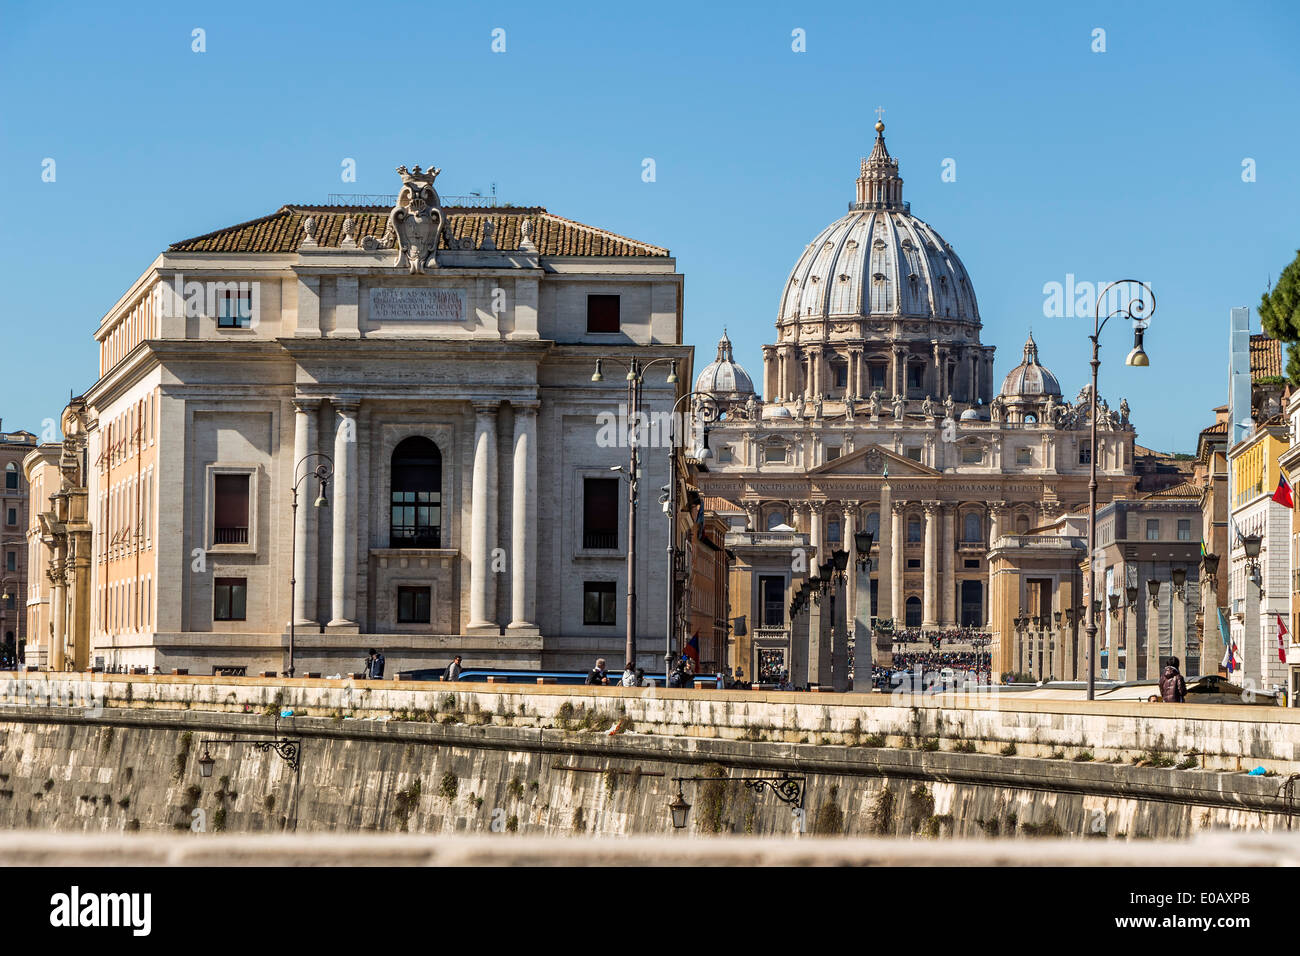 Italy, Rome, St. Peter's Basilica seen from Ponte Sant'Angelo Stock Photo